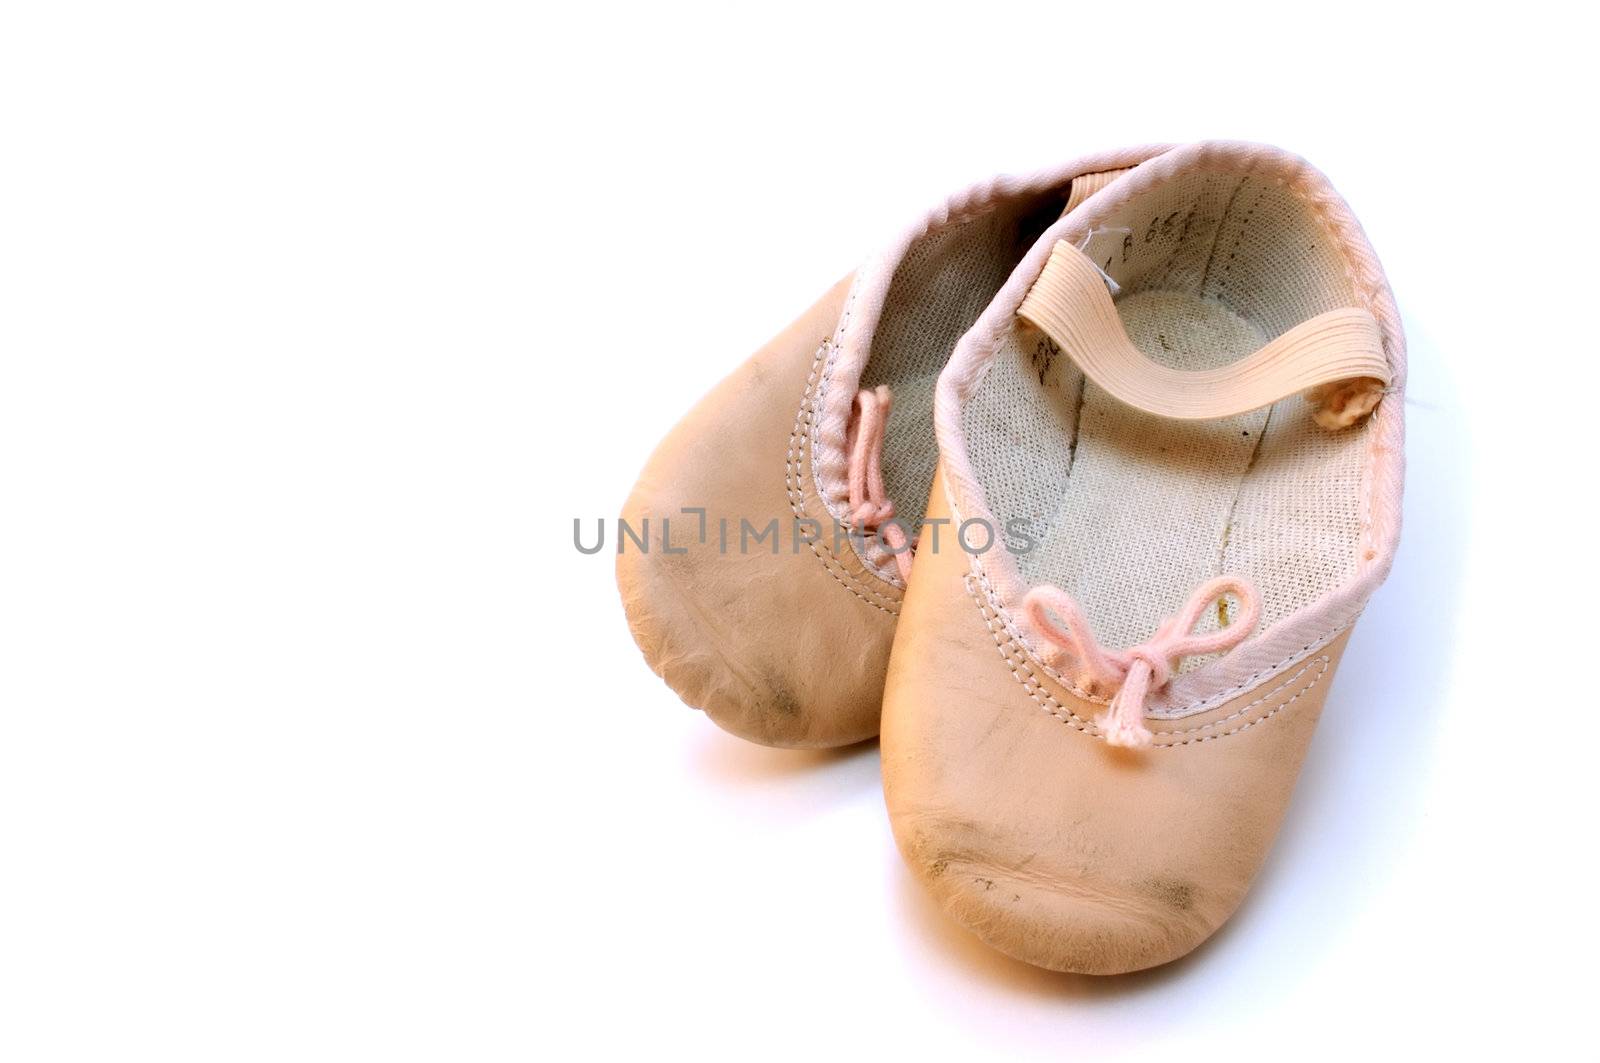 Small pink ballet shoes resting on a white background